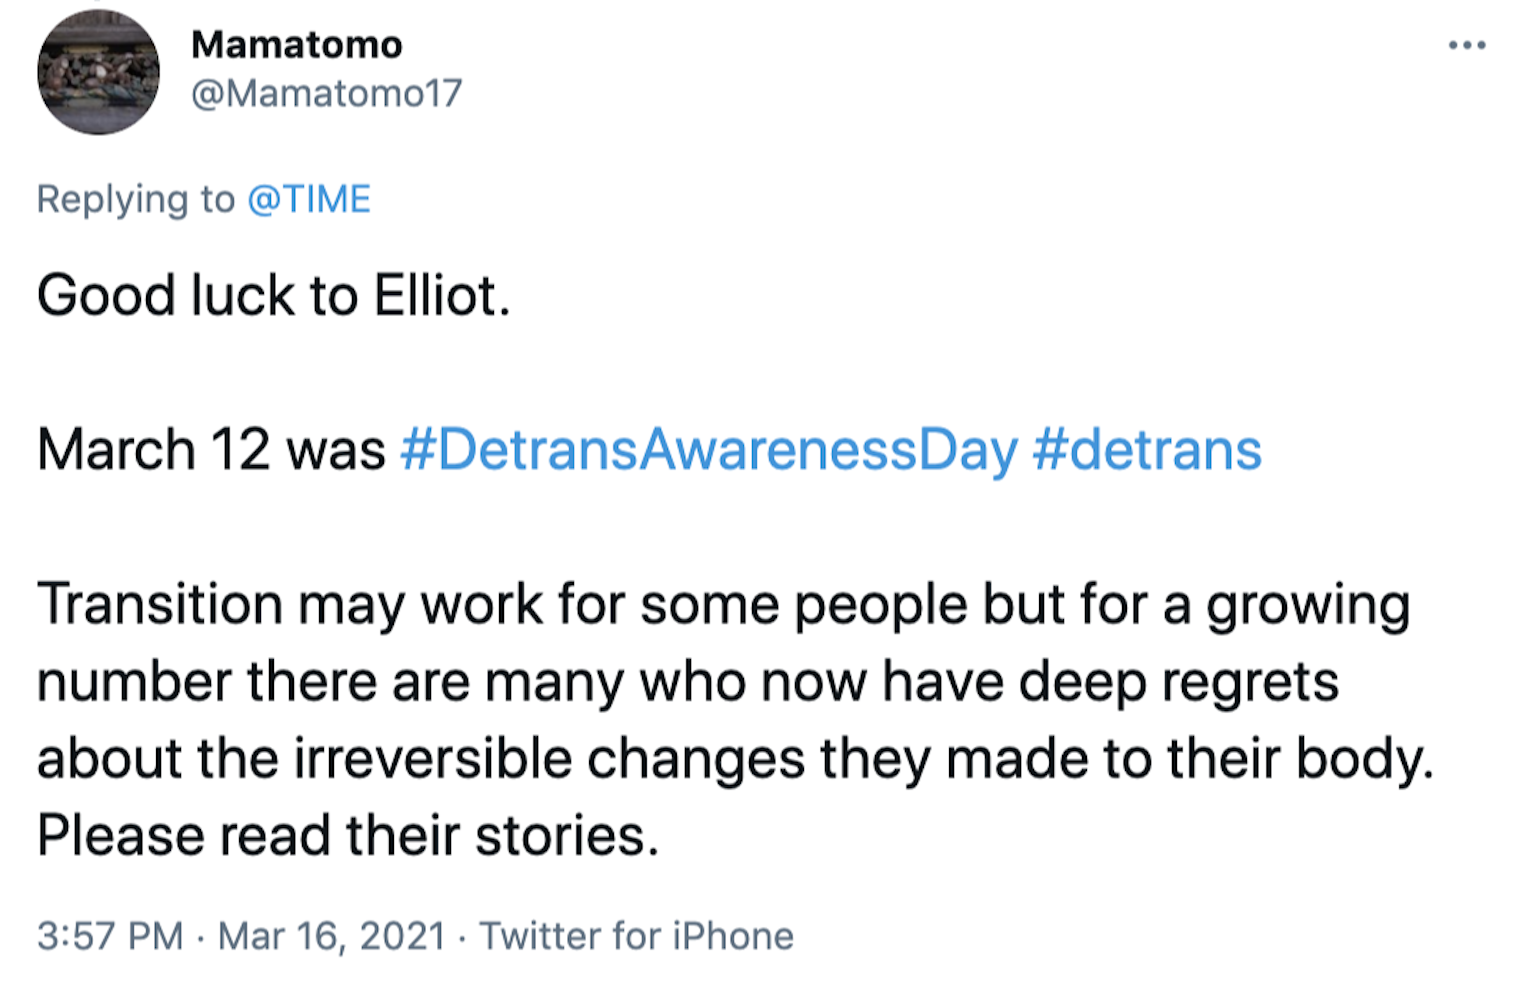 Good luck to Elliot.   March 12 was #DetransAwarenessDay #detrans   Transition may work for some people but for a growing number there are many who now have deep regrets about the irreversible changes they made to their body. Please read their stories.